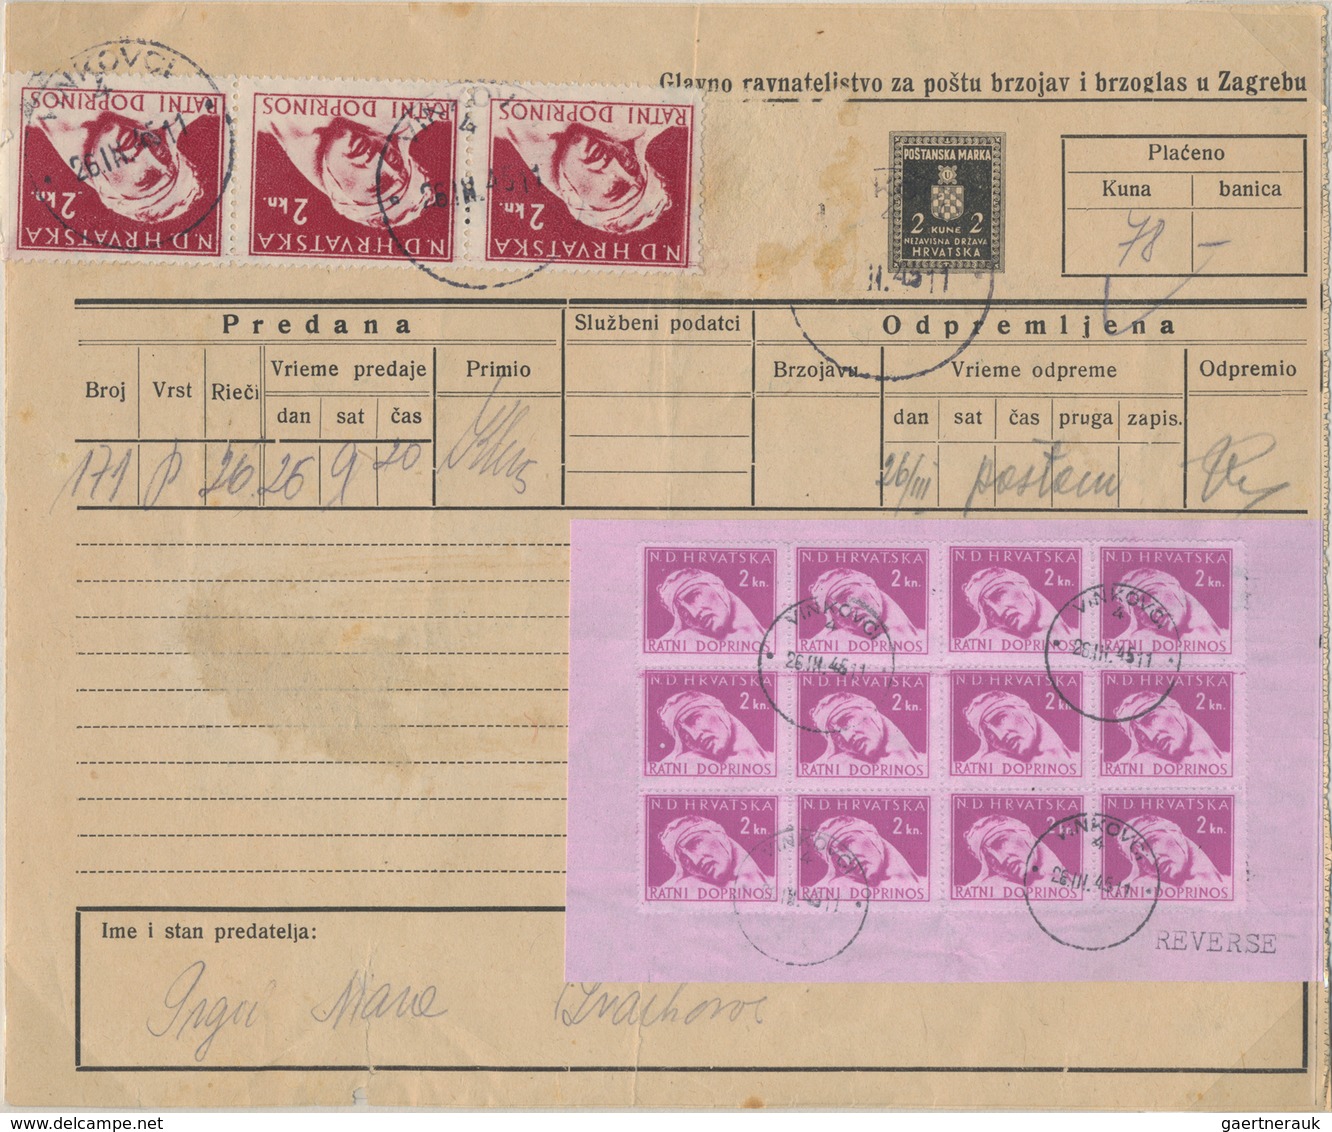 Kroatien: 1941/1945, Postal History of Croatia, extraordinary exhibit of apprx. 280 covers/cards on